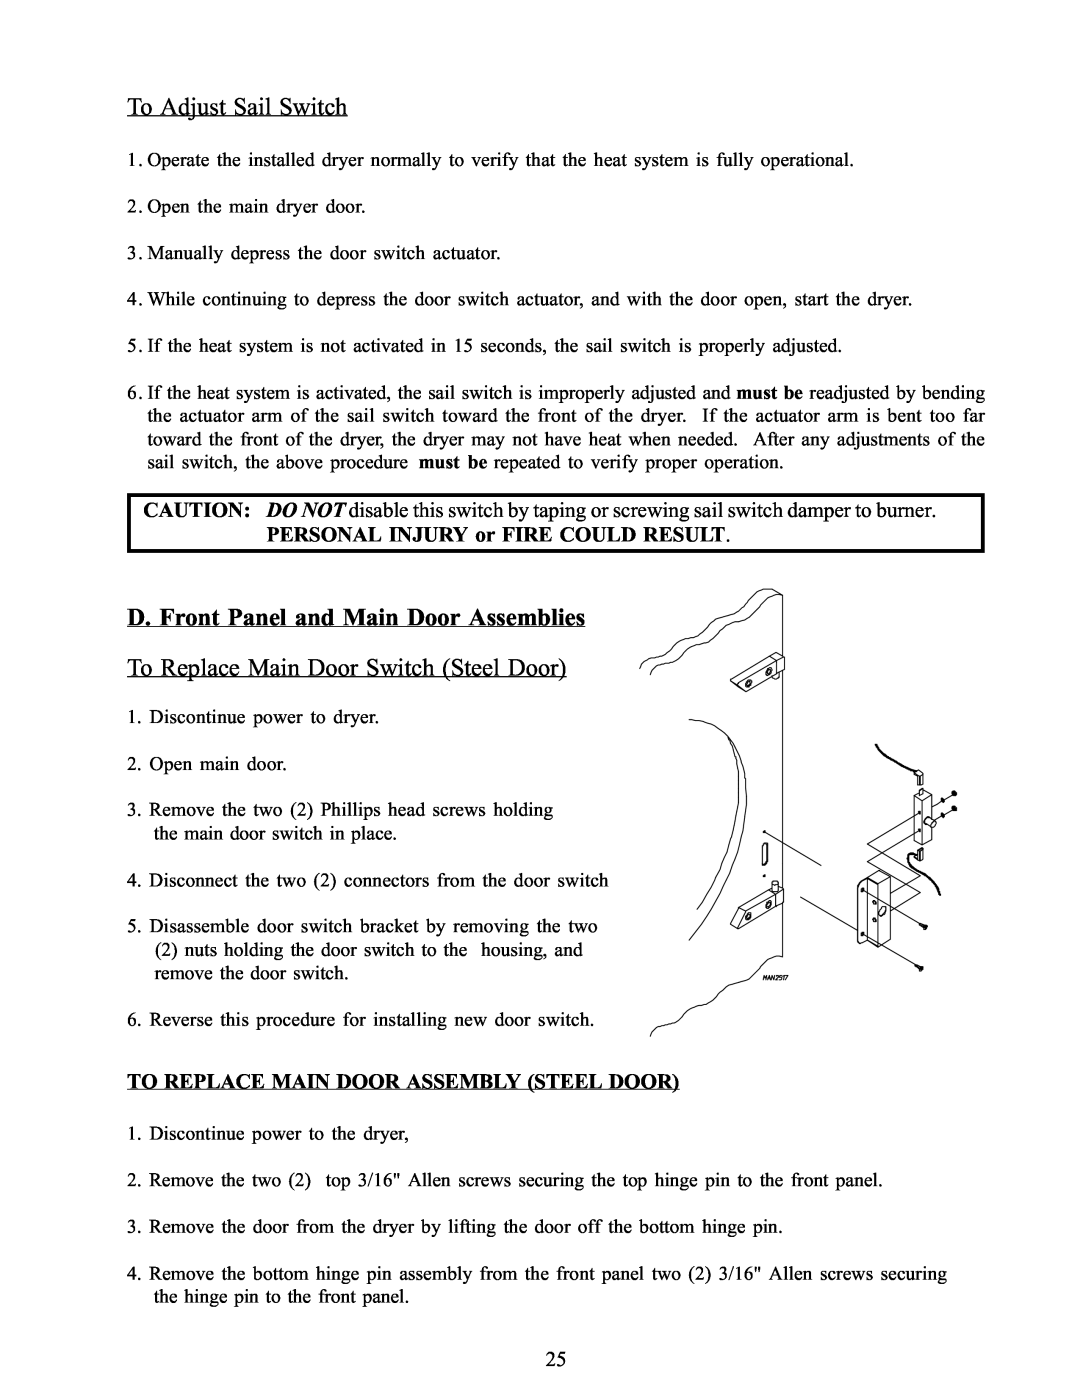 American Dryer Corp WDA-385 service manual To Adjust Sail Switch, D. Front Panel and Main Door Assemblies 